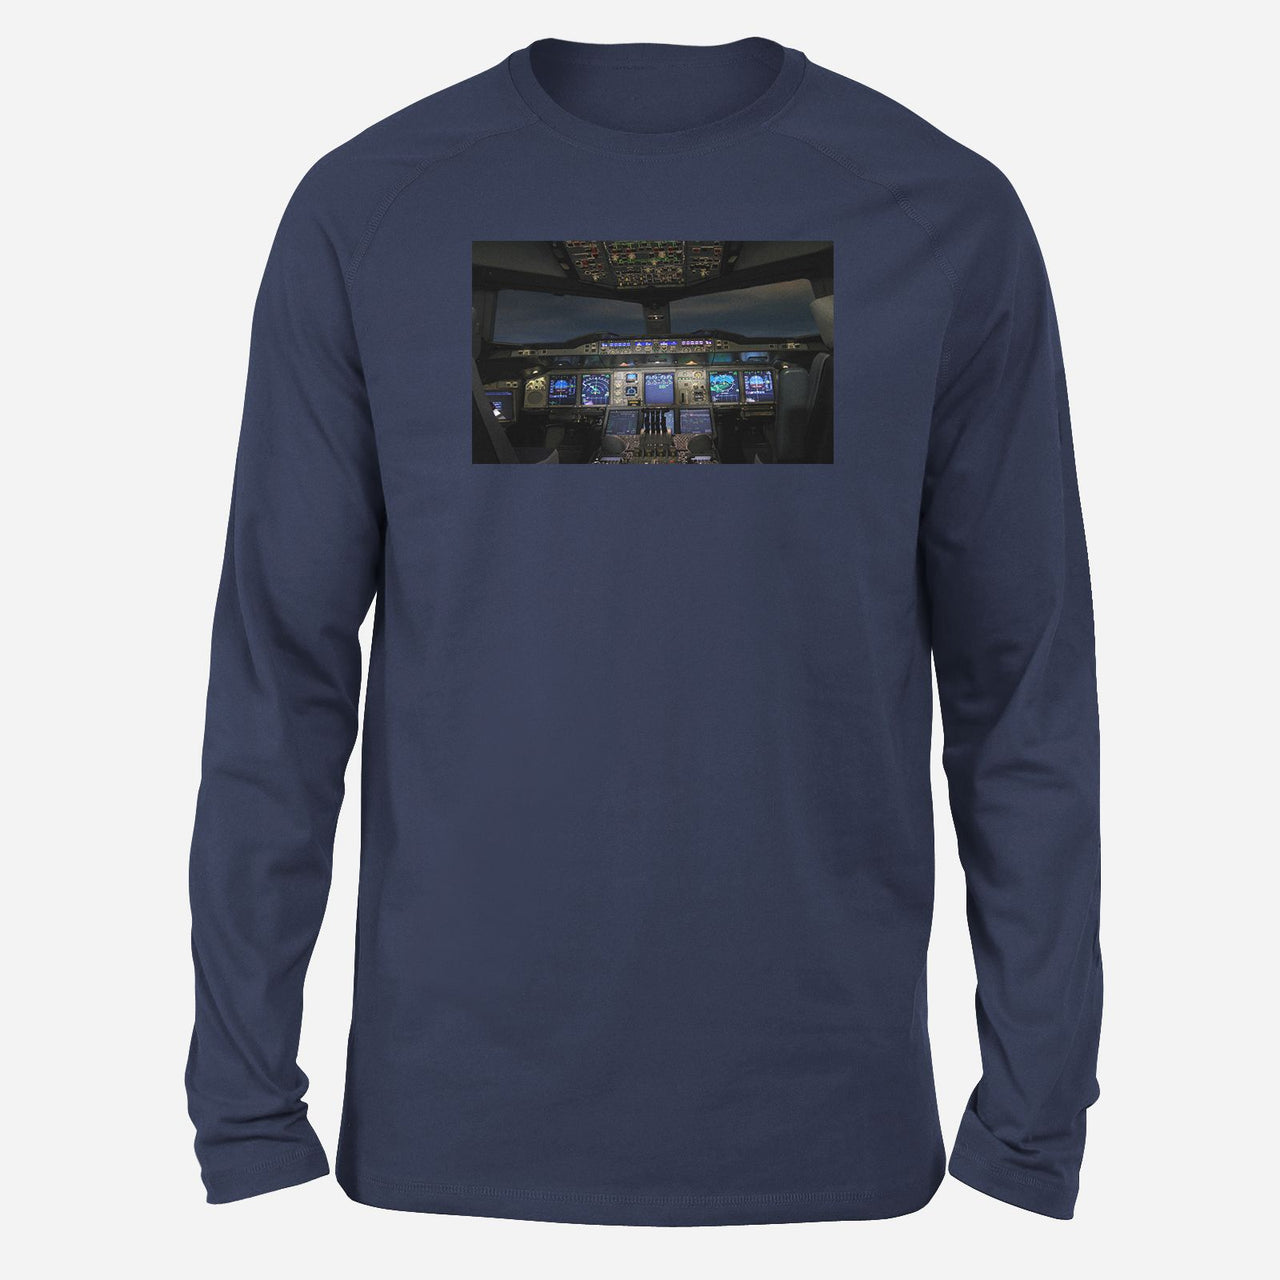 Airbus A380 Cockpit Designed Long-Sleeve T-Shirts